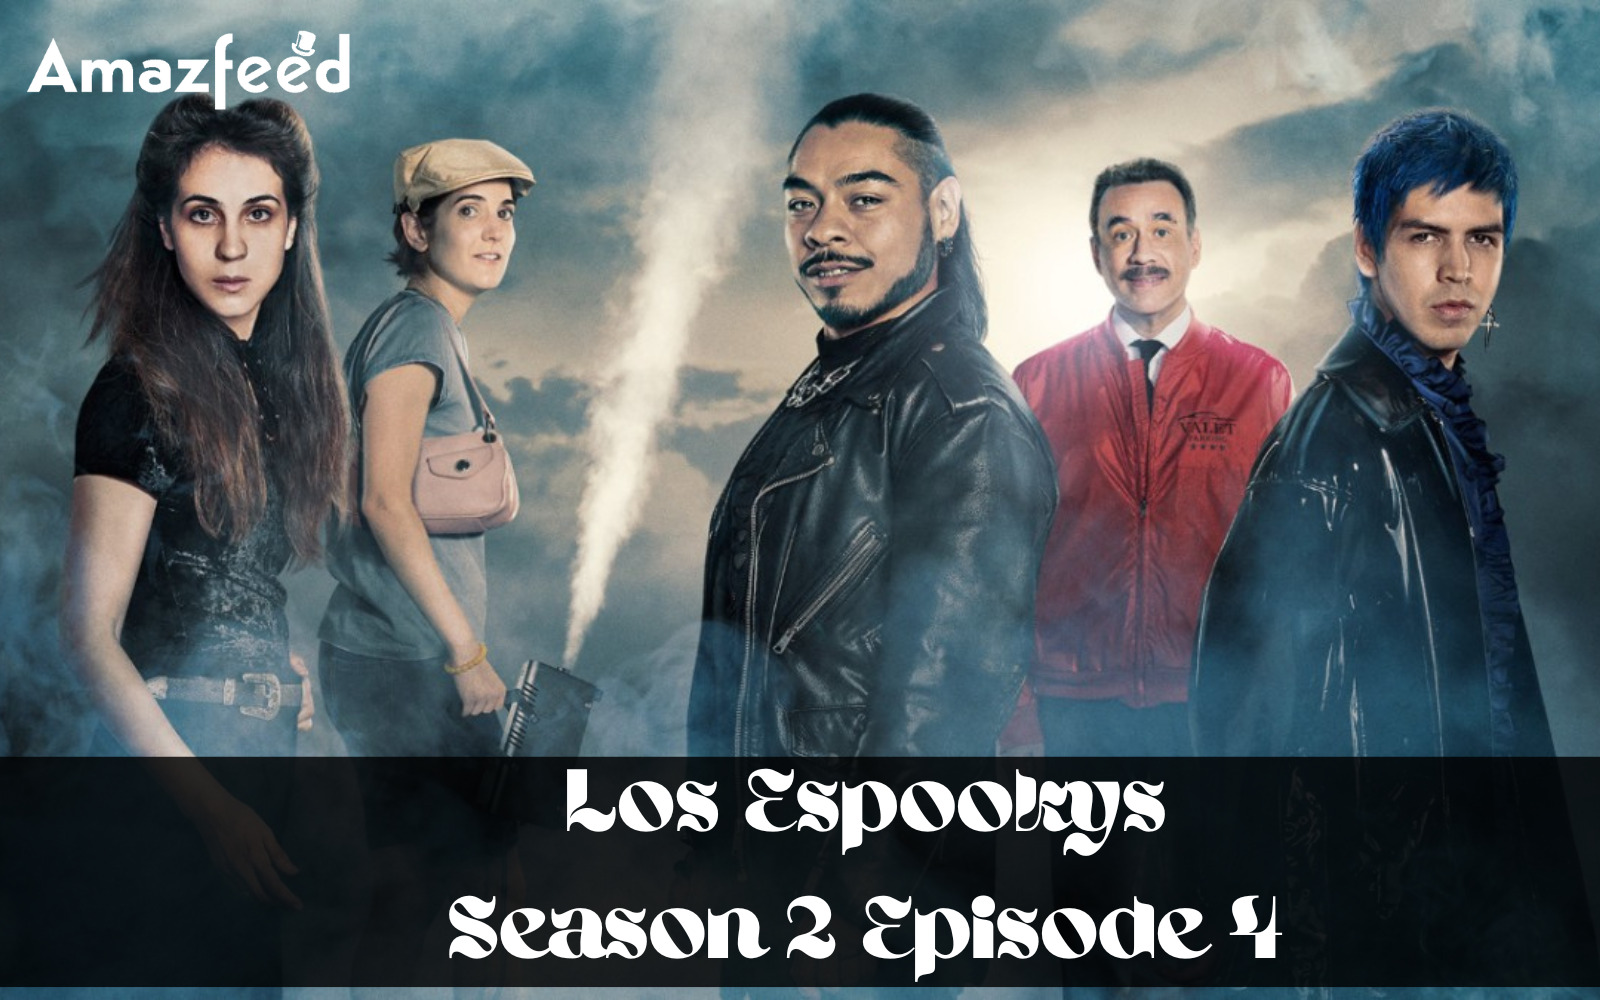 When Is Los Espookys Season 2 Episode 4 Coming Out (Release Date)